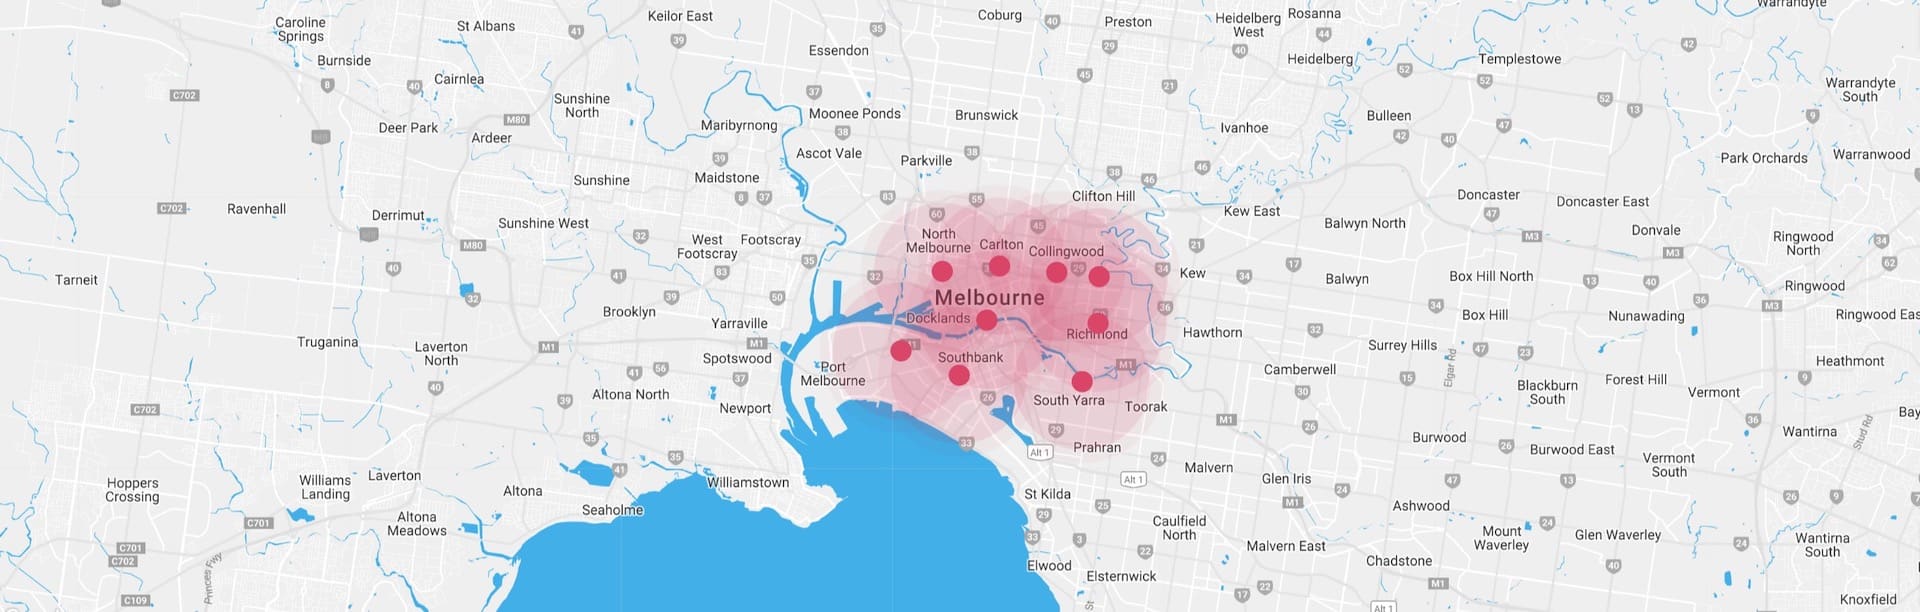 whistleclean-service-areas-melbourne